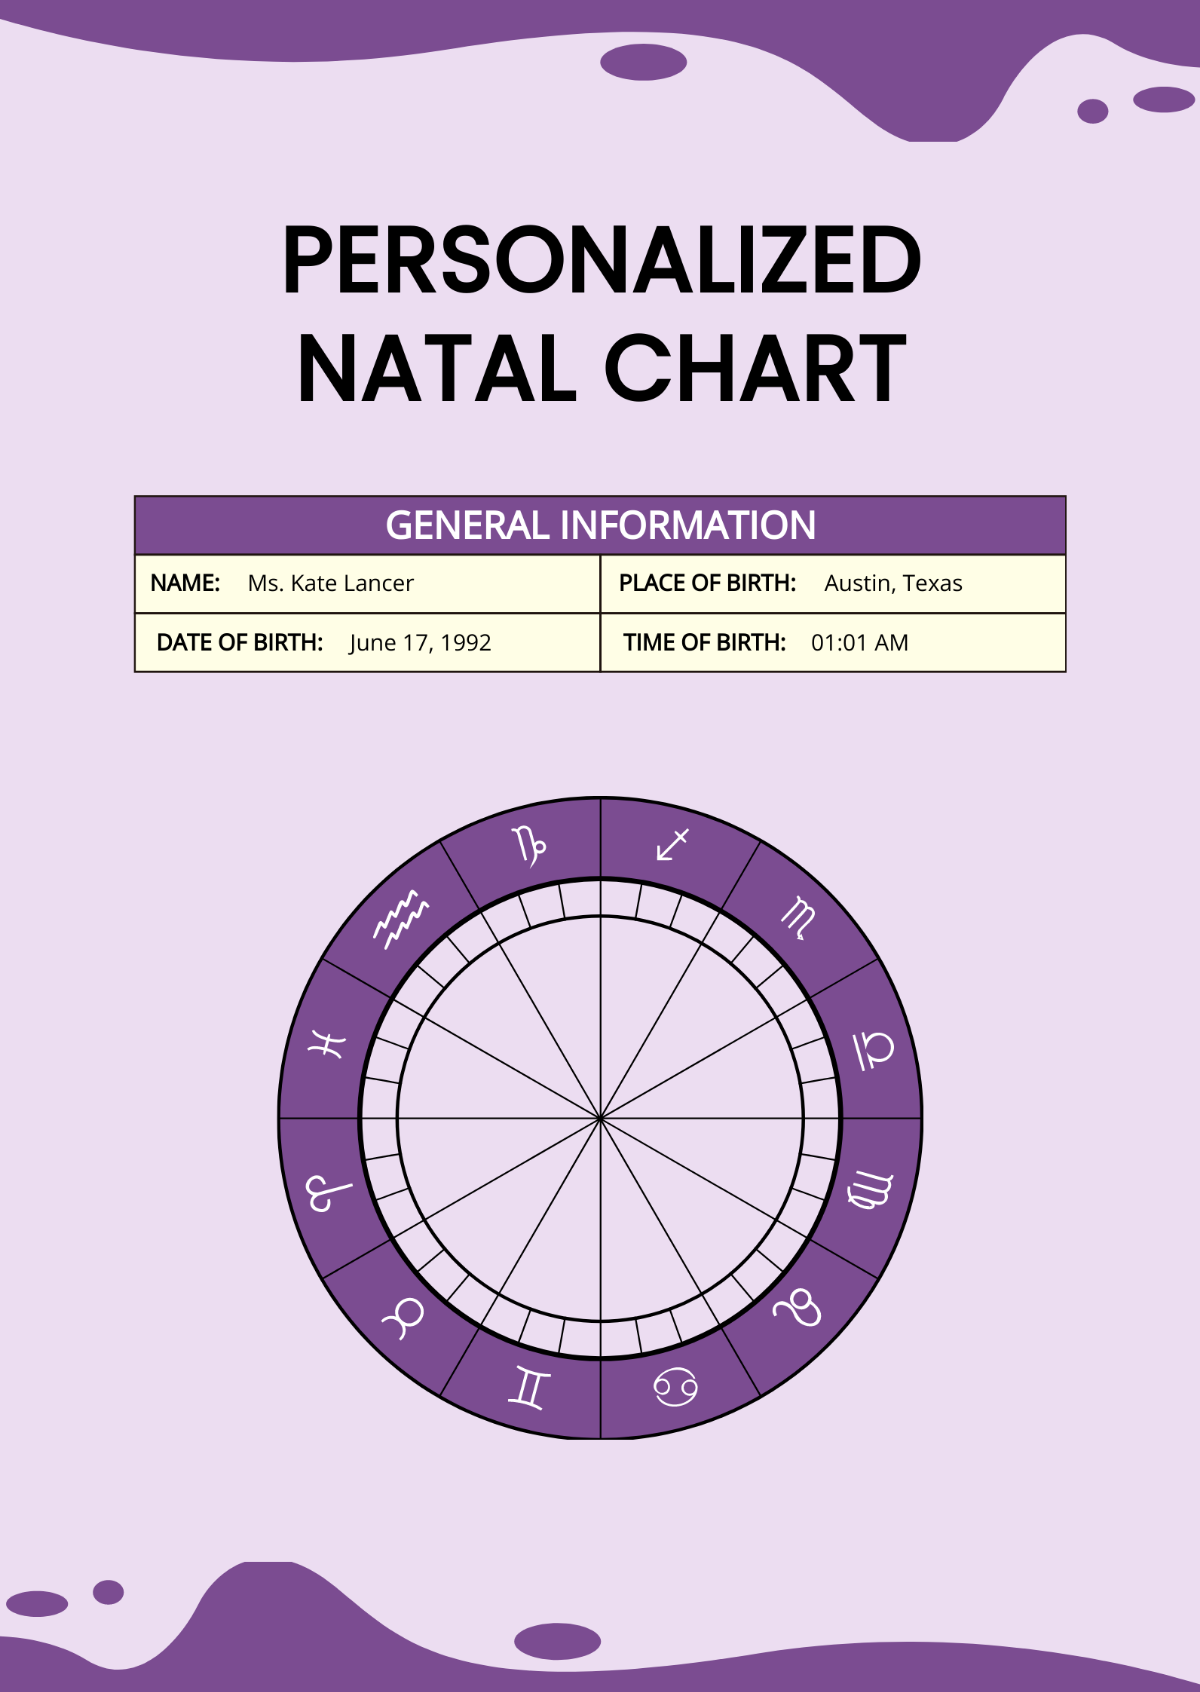 Personalized Natal Chart Template